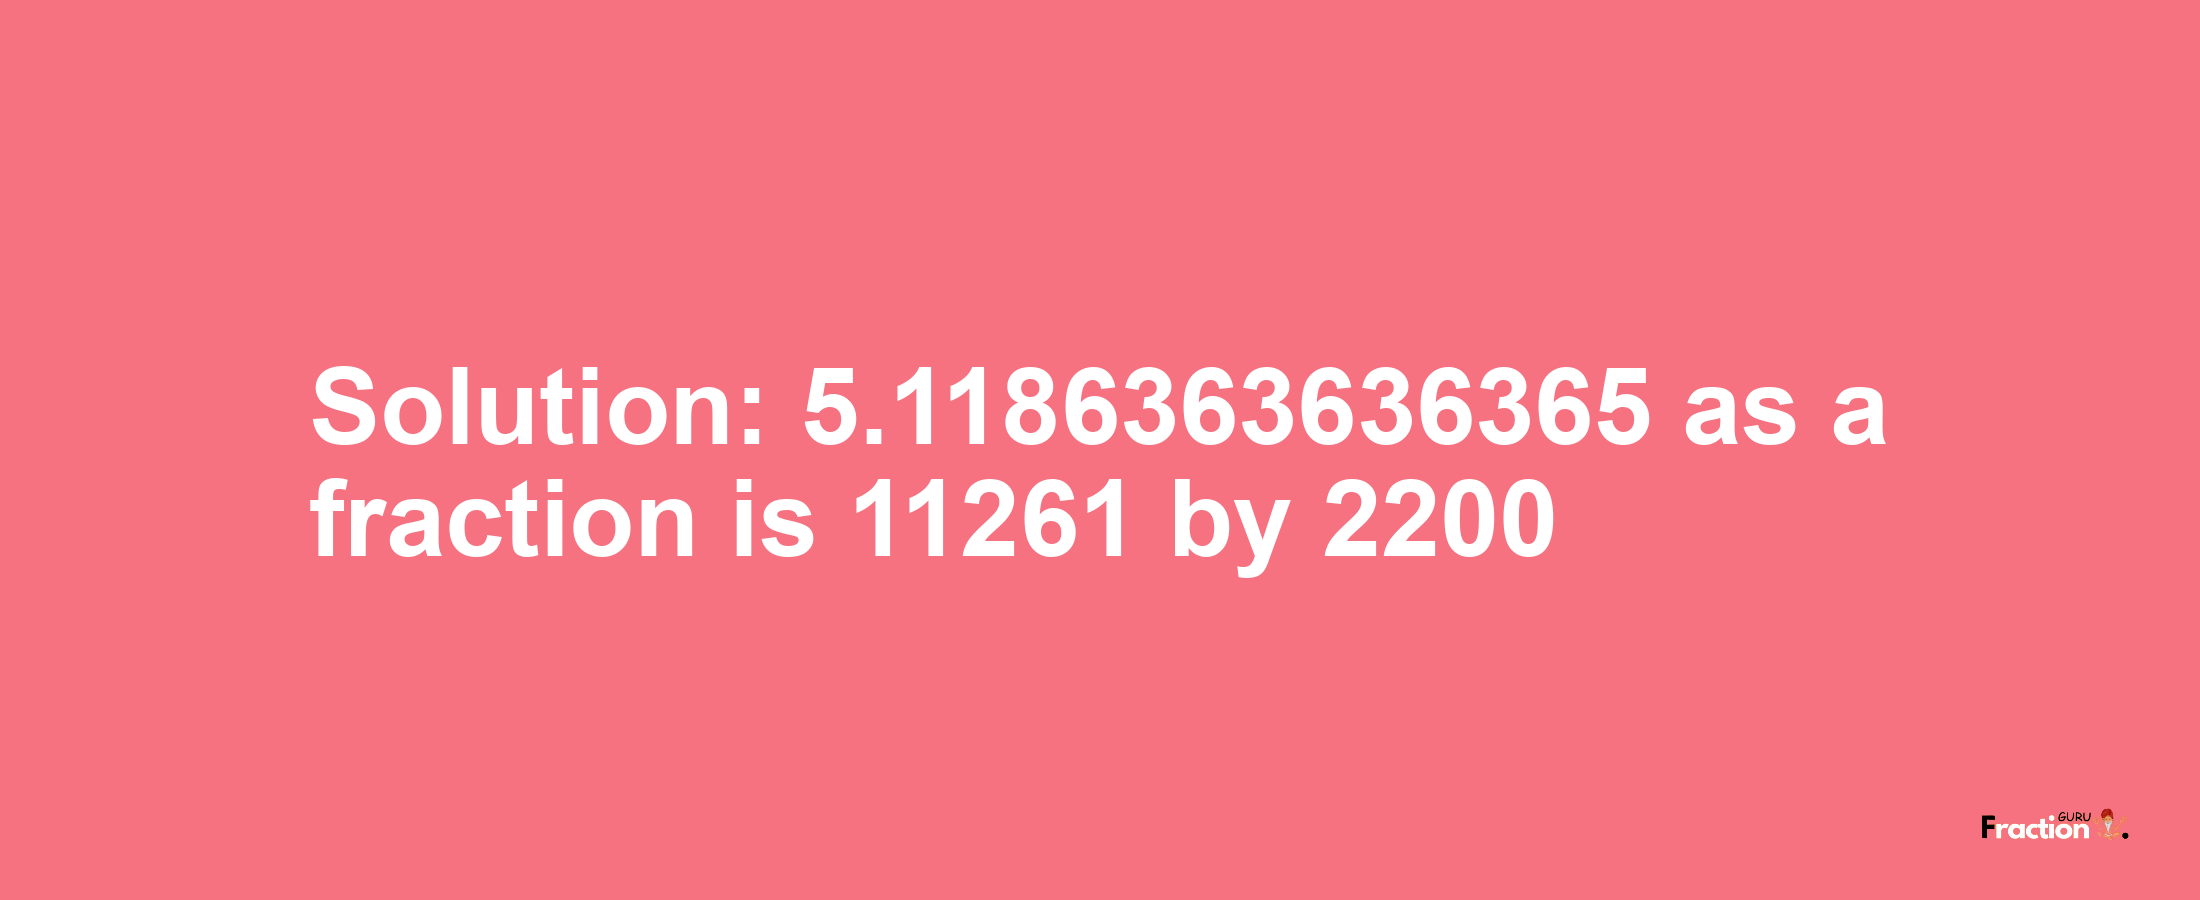 Solution:5.1186363636365 as a fraction is 11261/2200